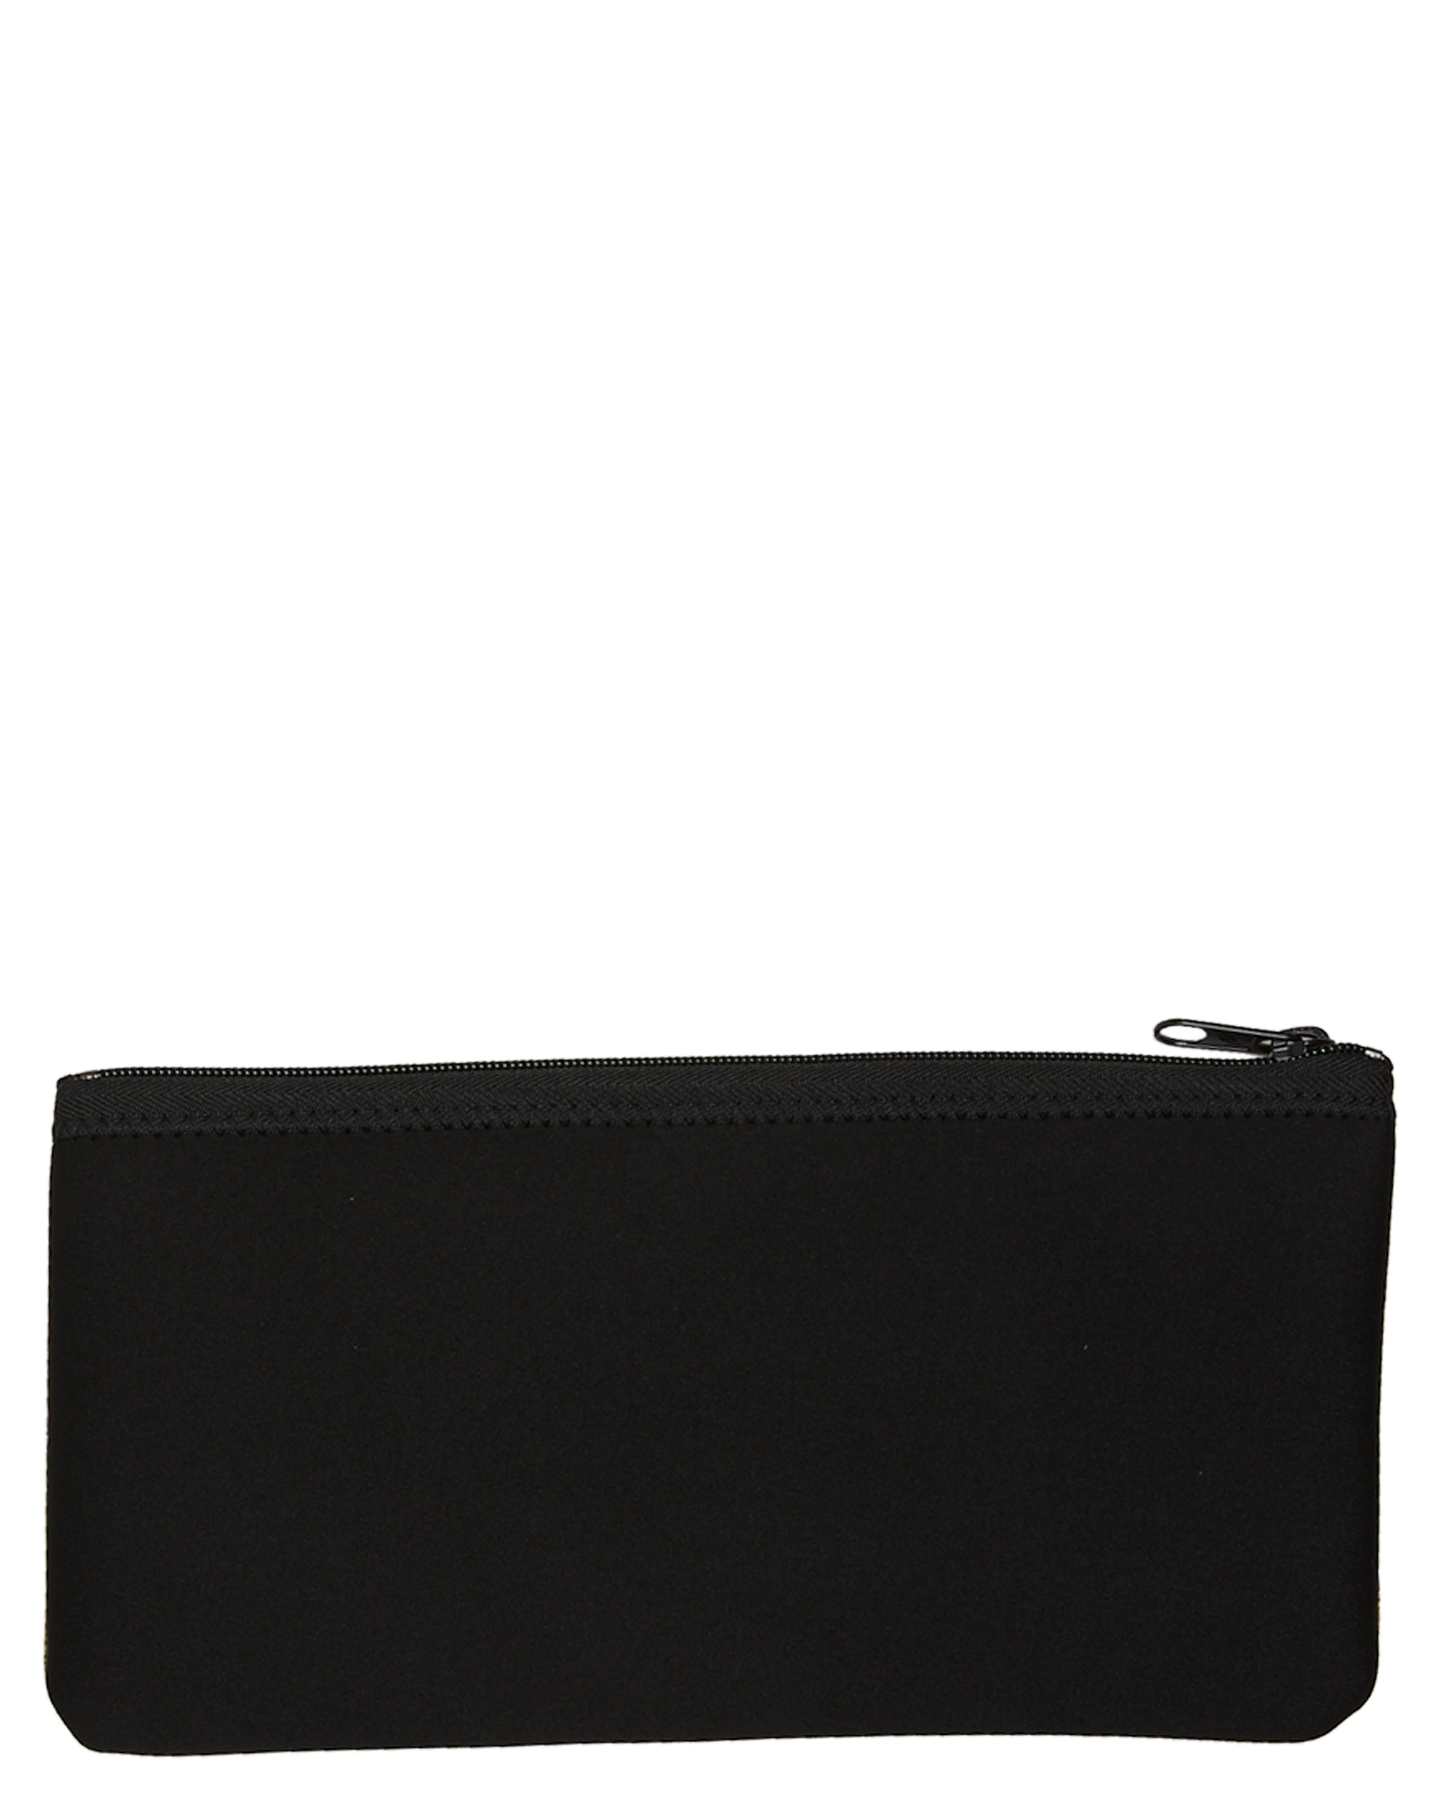 Rip Curl Small Pencil Case Variety - Black | SurfStitch